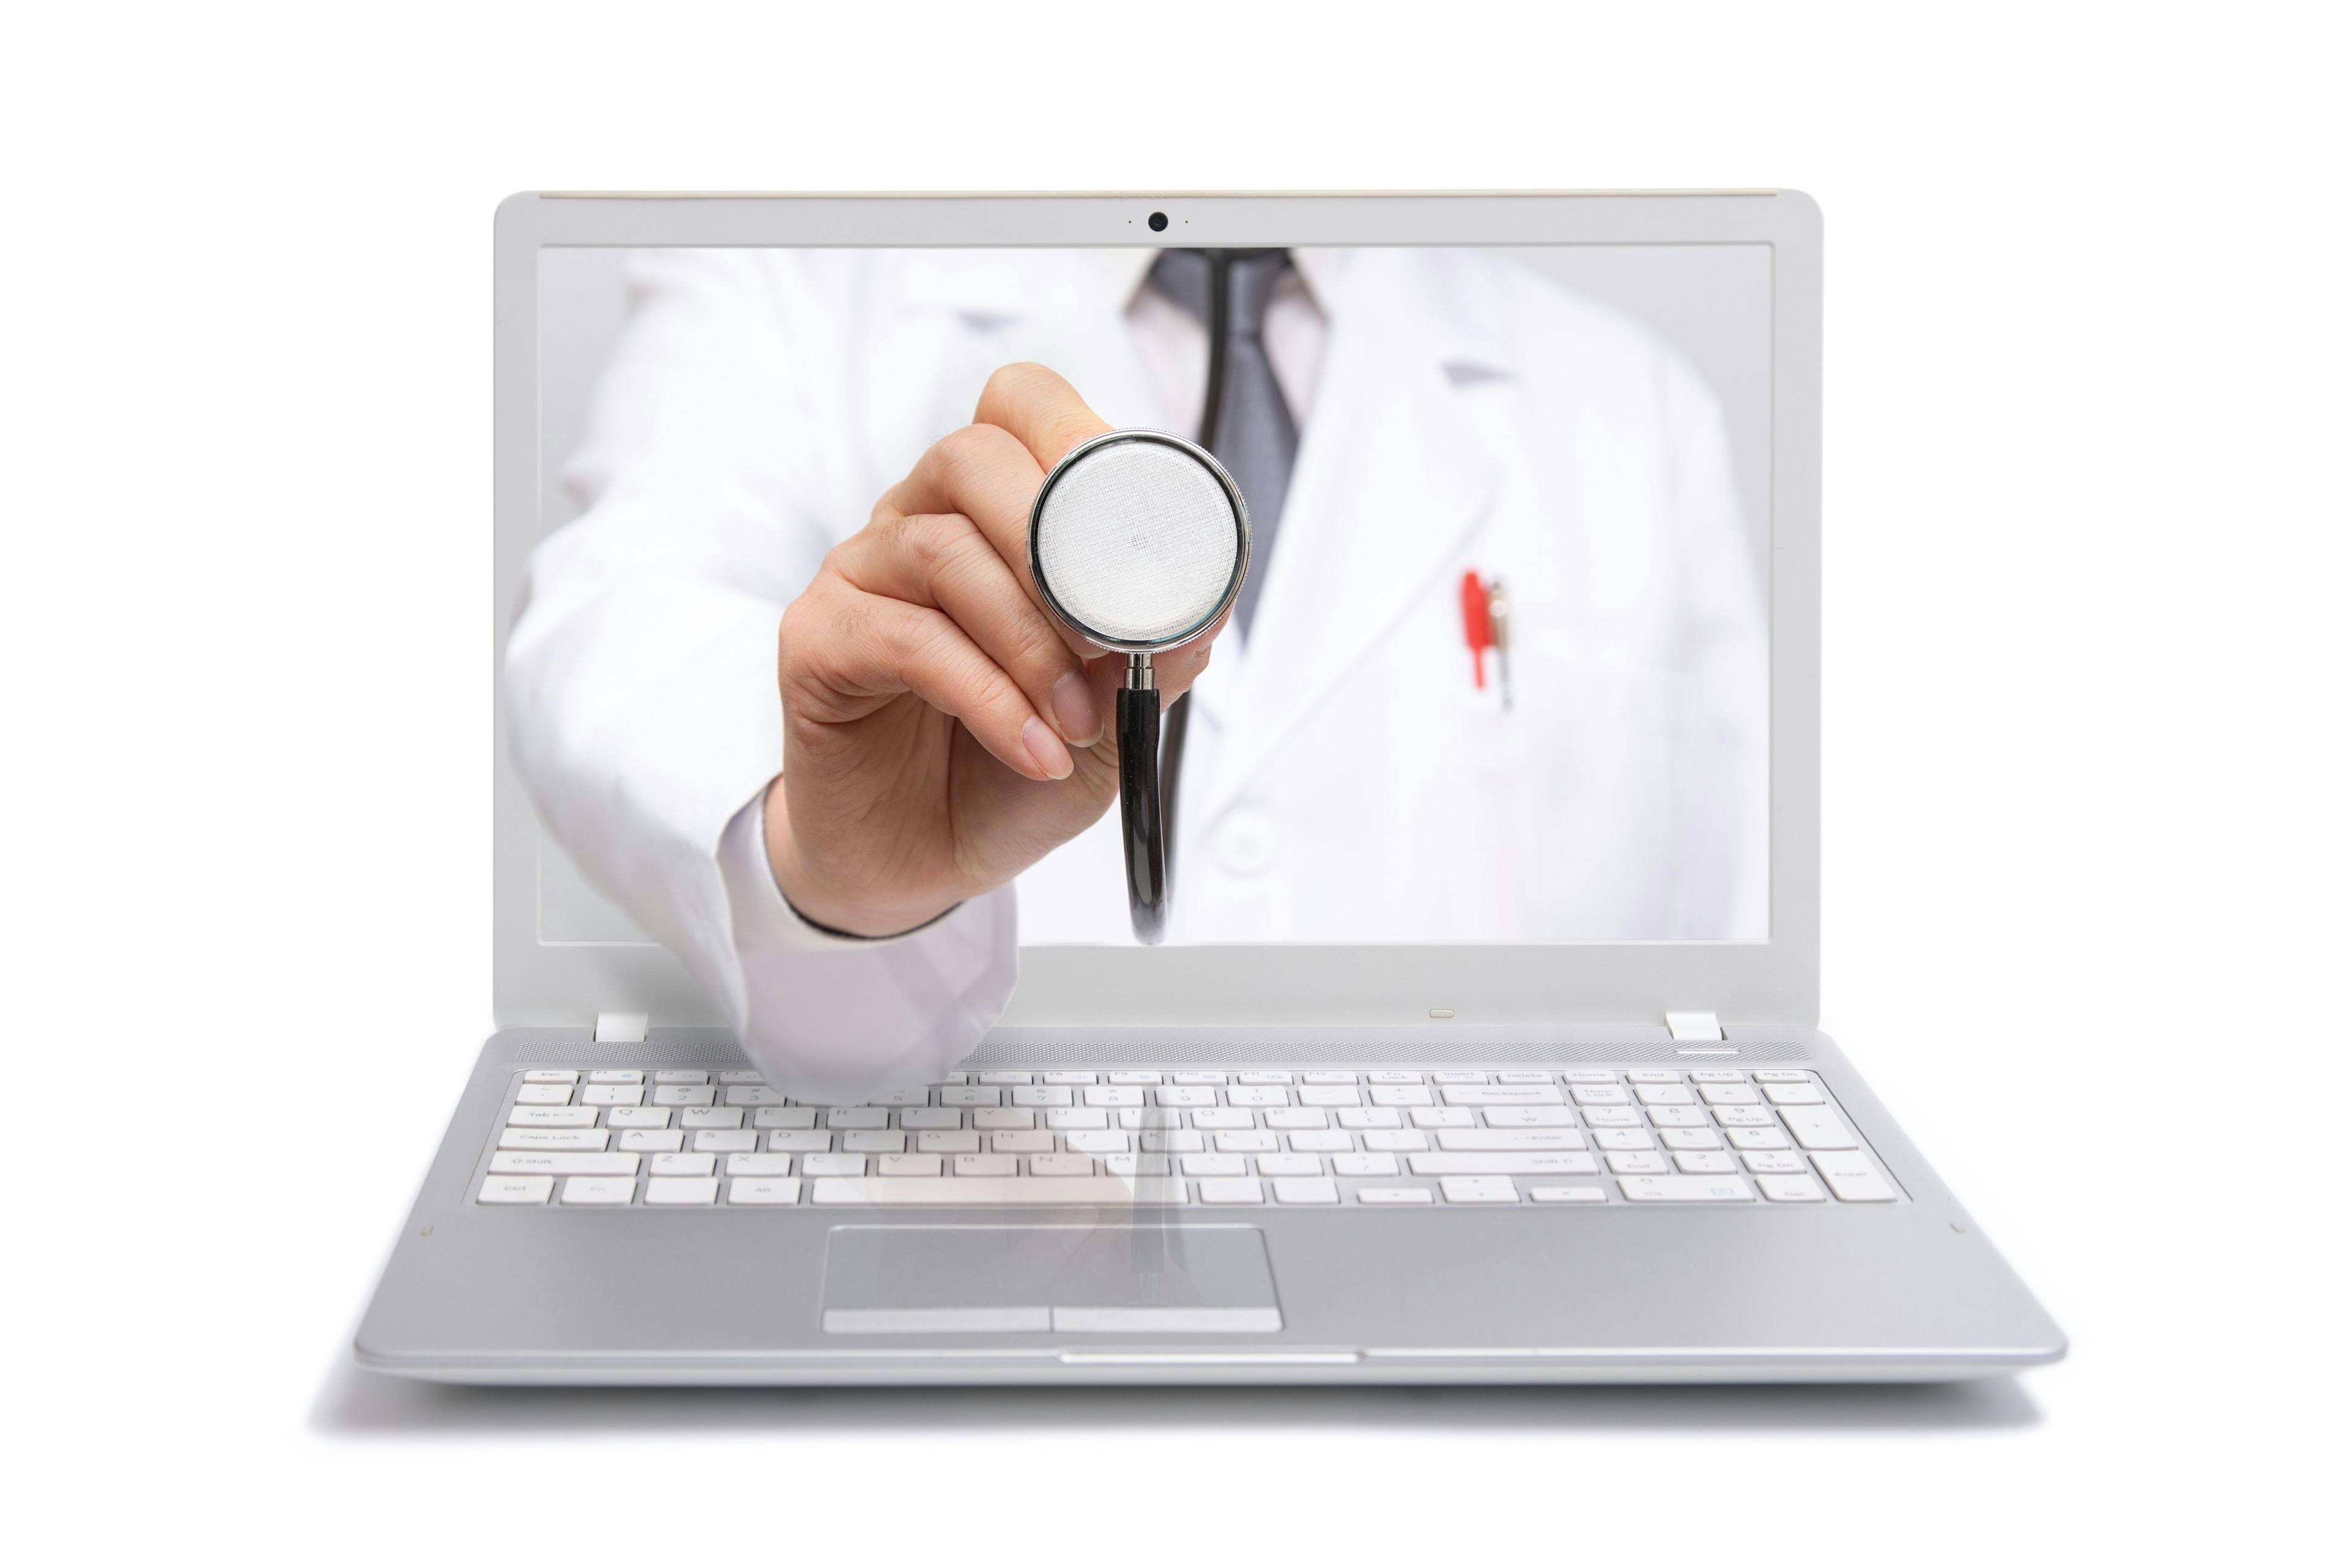 Patient satisfaction with virtual visits is high